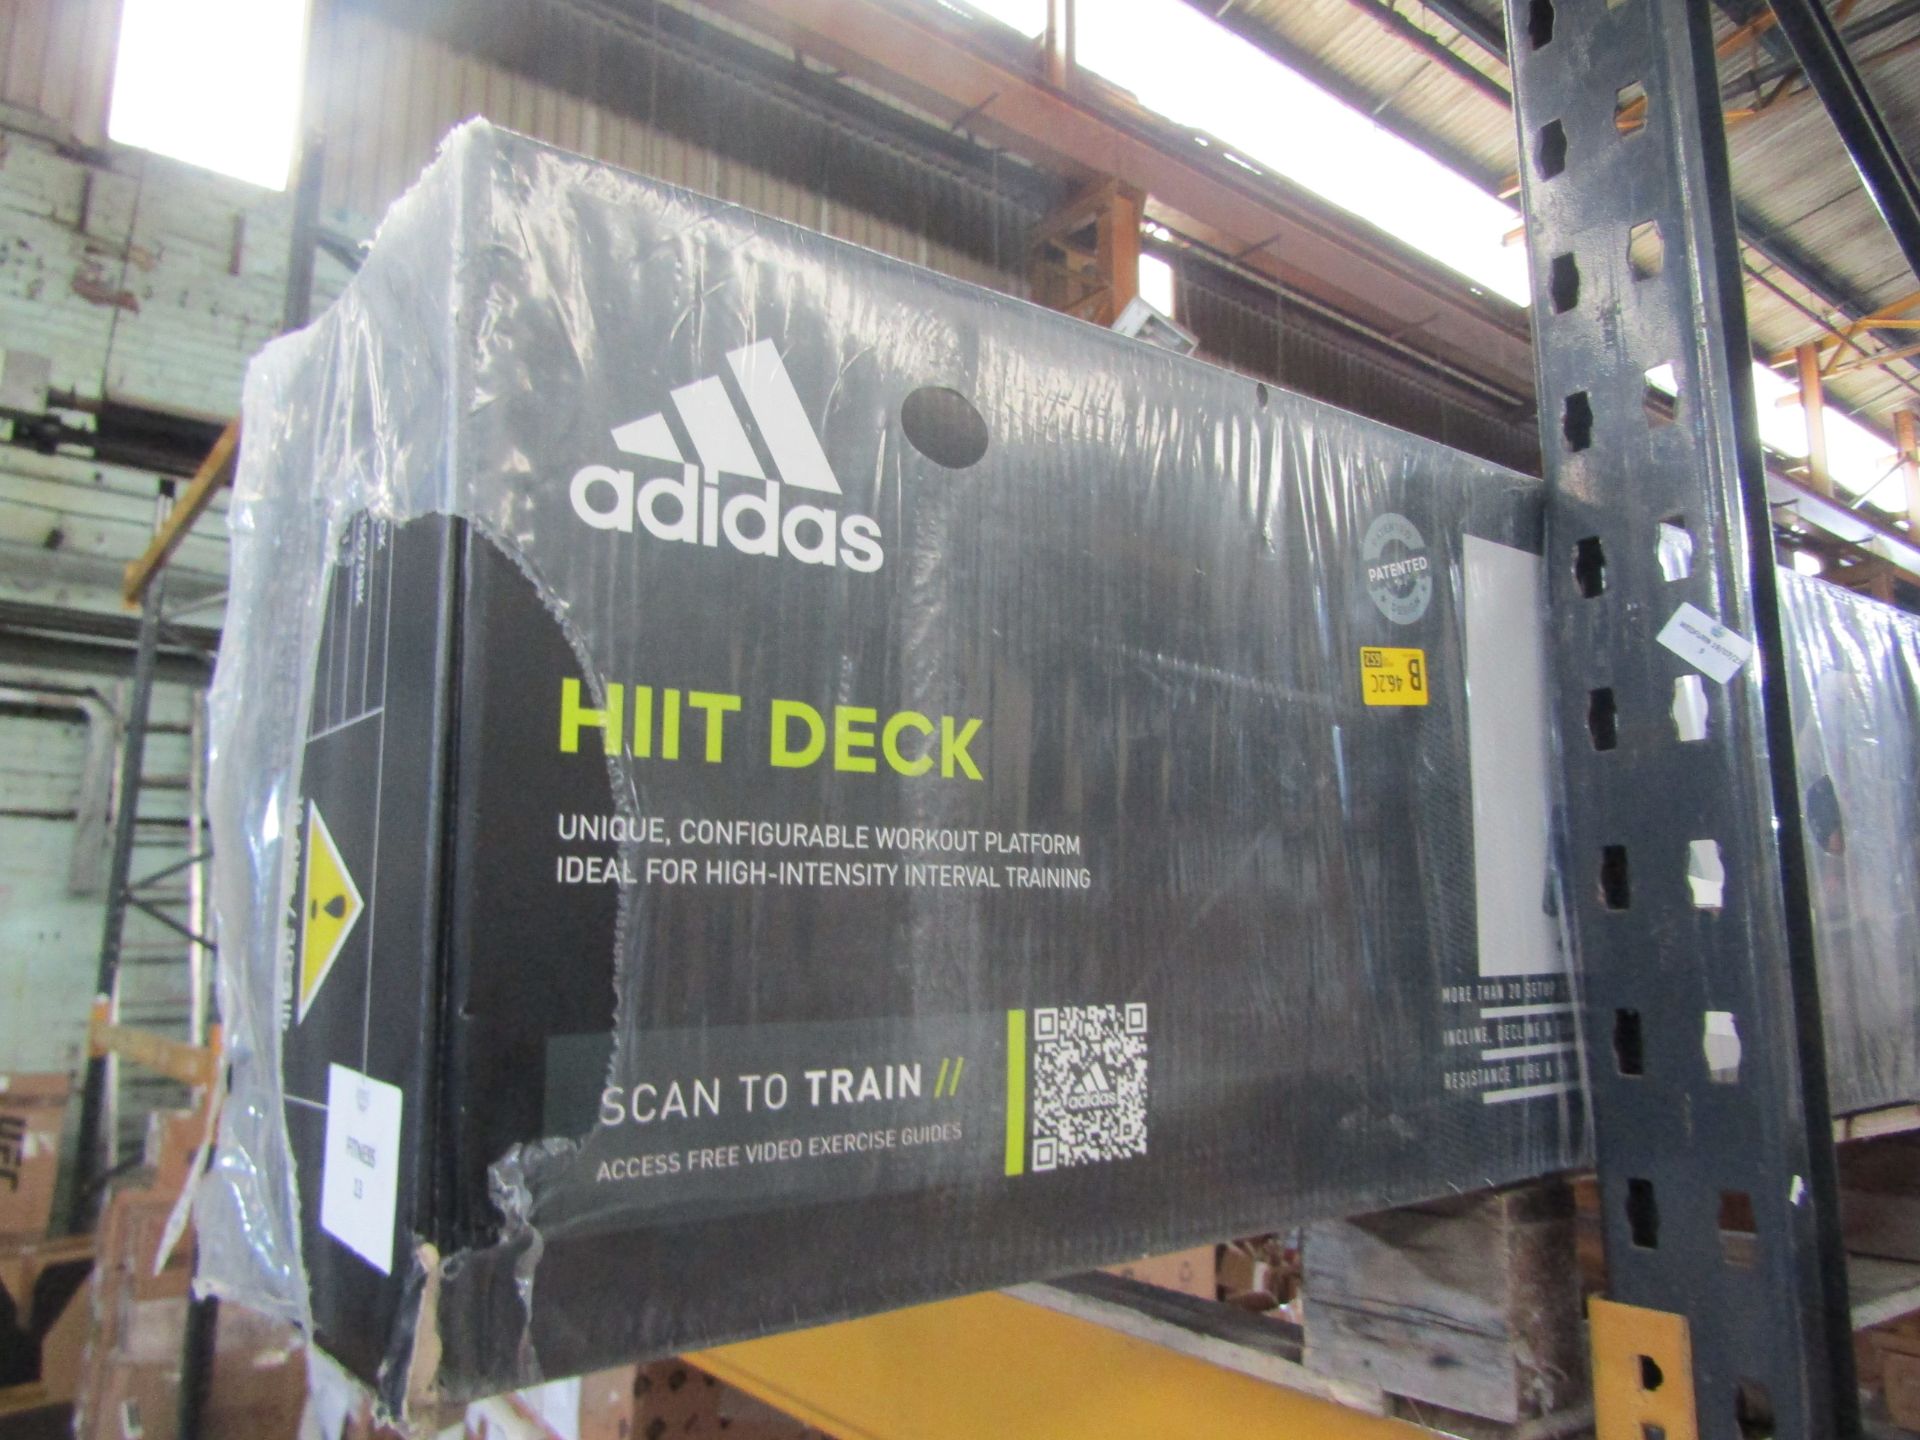 Sweatband adidas HIIT Deck RRP 149.00 About the Product(s) adidas HIIT DeckThe HIIT Deck from adidas